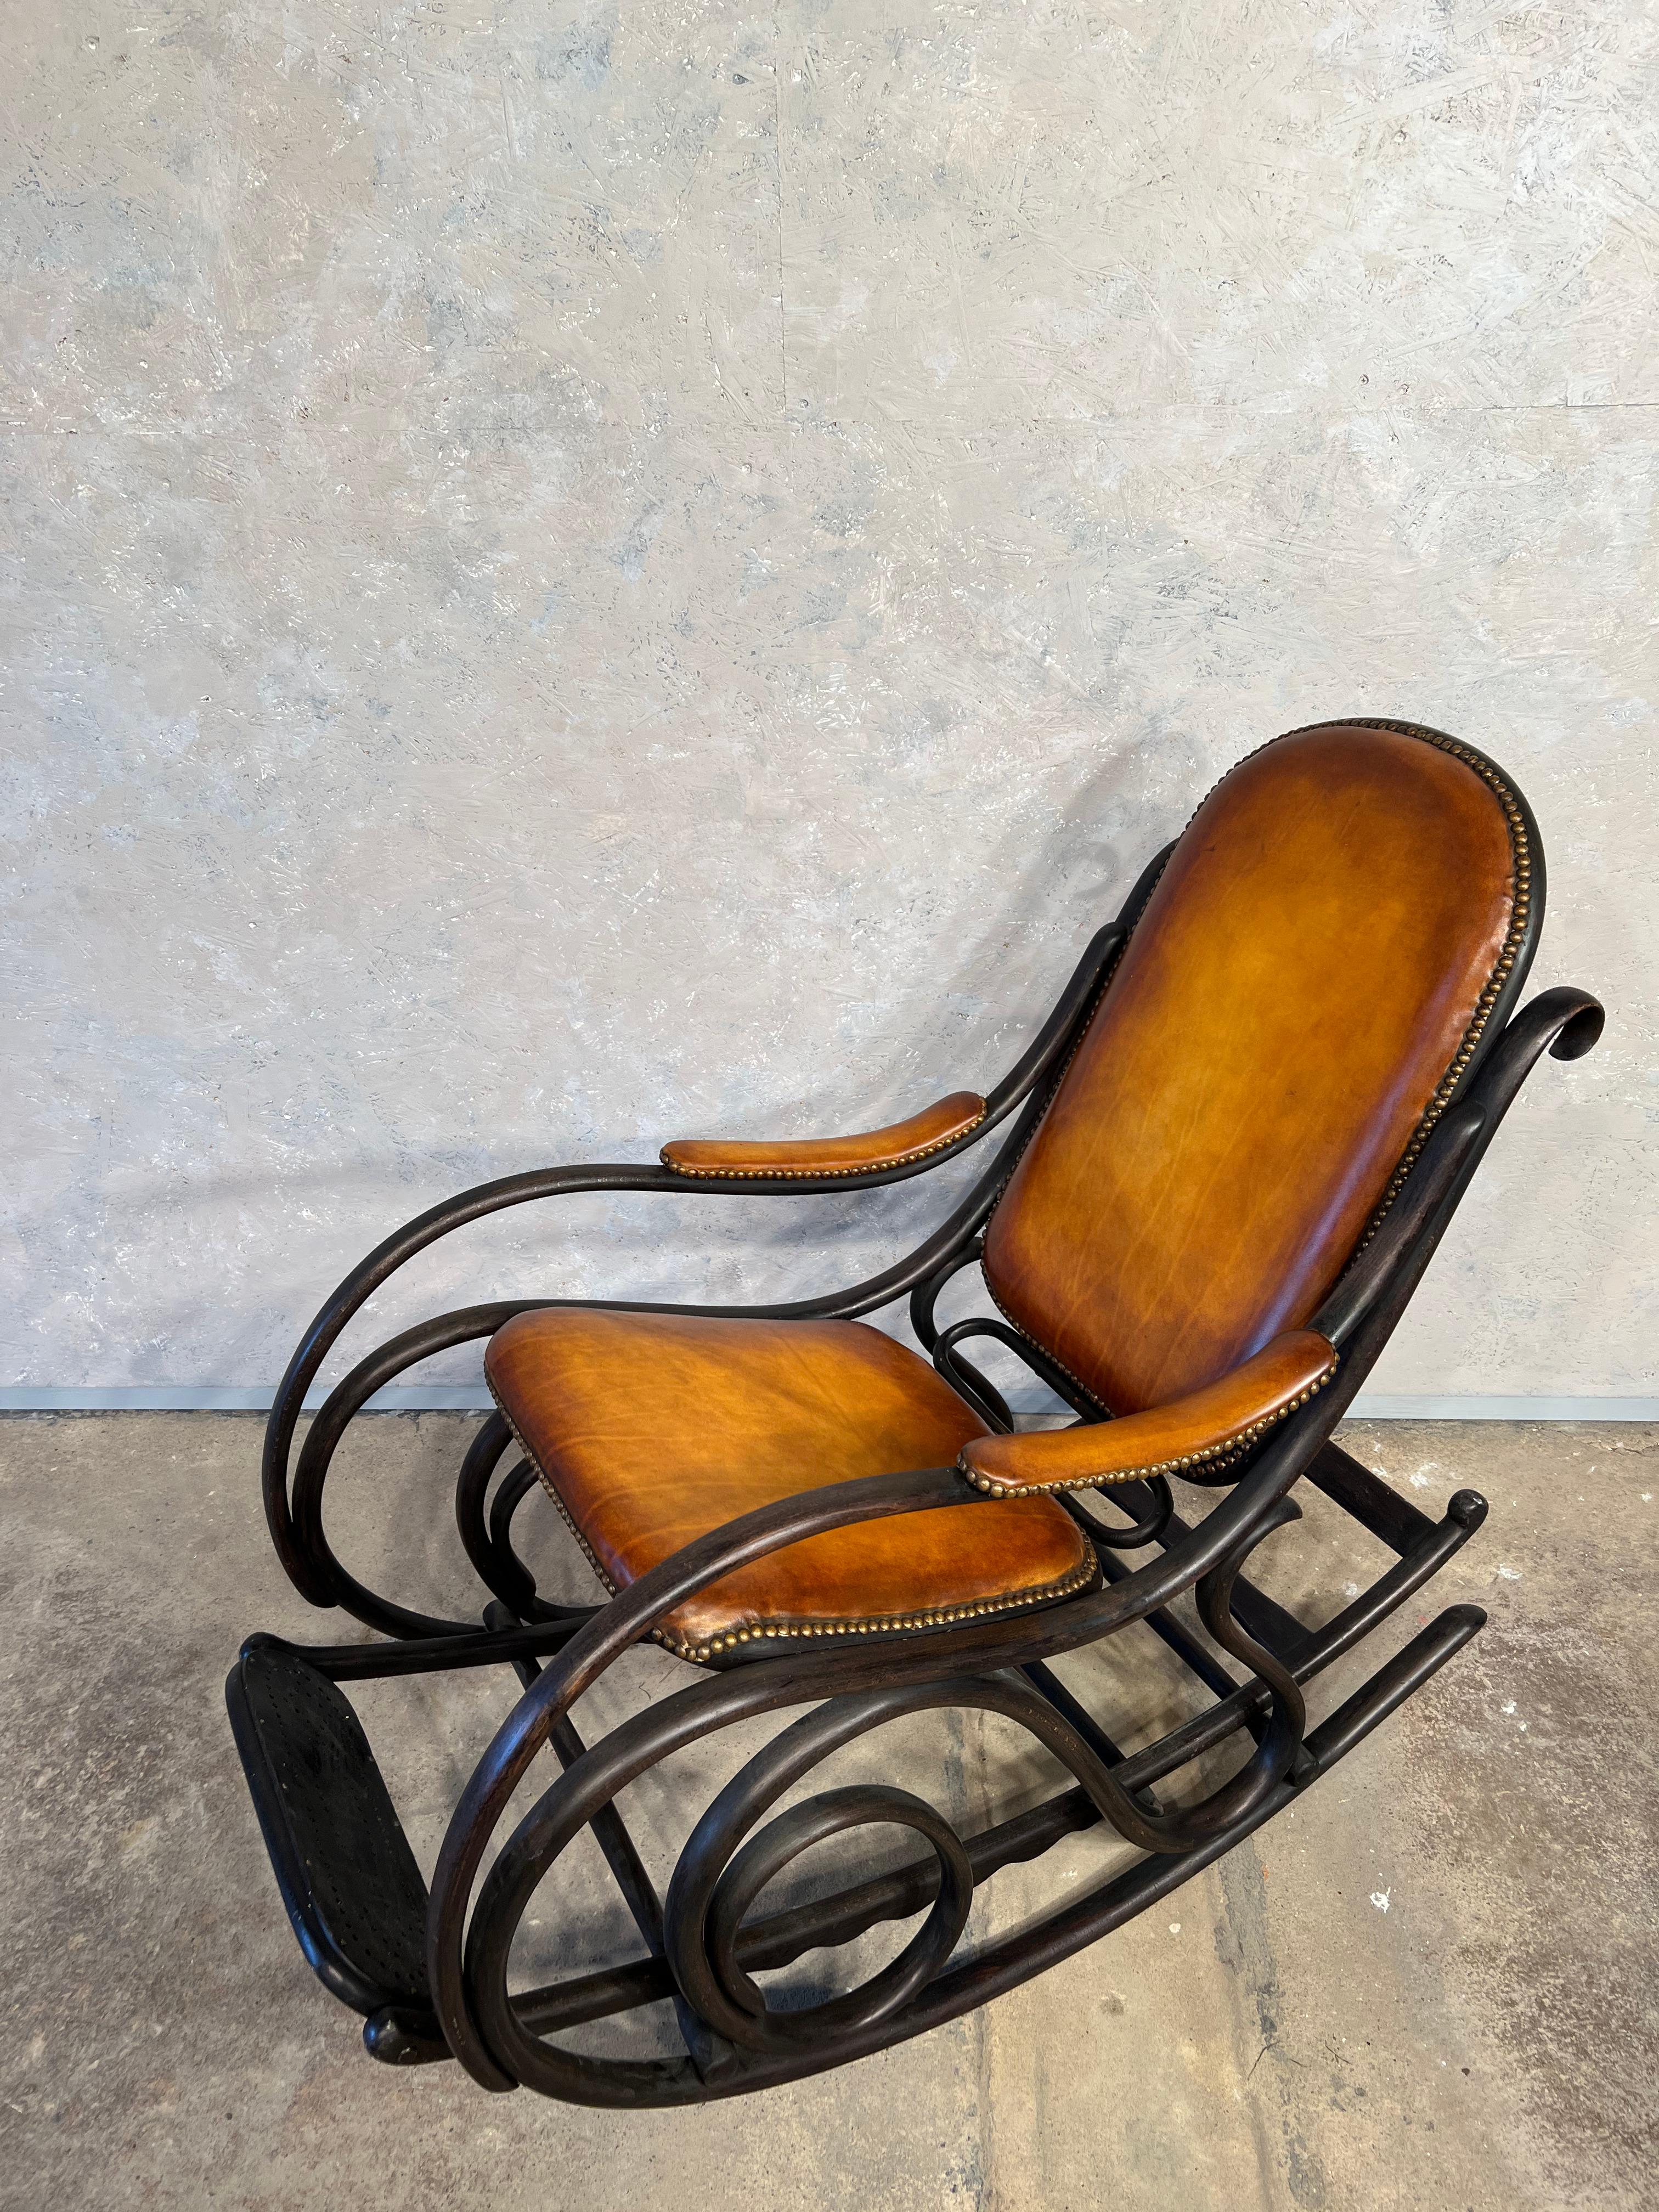 Rocking chair, original from the early 1900 Art Nouveau, with ebonised curved beech frame, upholstered seat, back and armrests.

Restored and reupholstered in leather of excellent workmanship in a patinated tan colour, the contrast is stunning. In